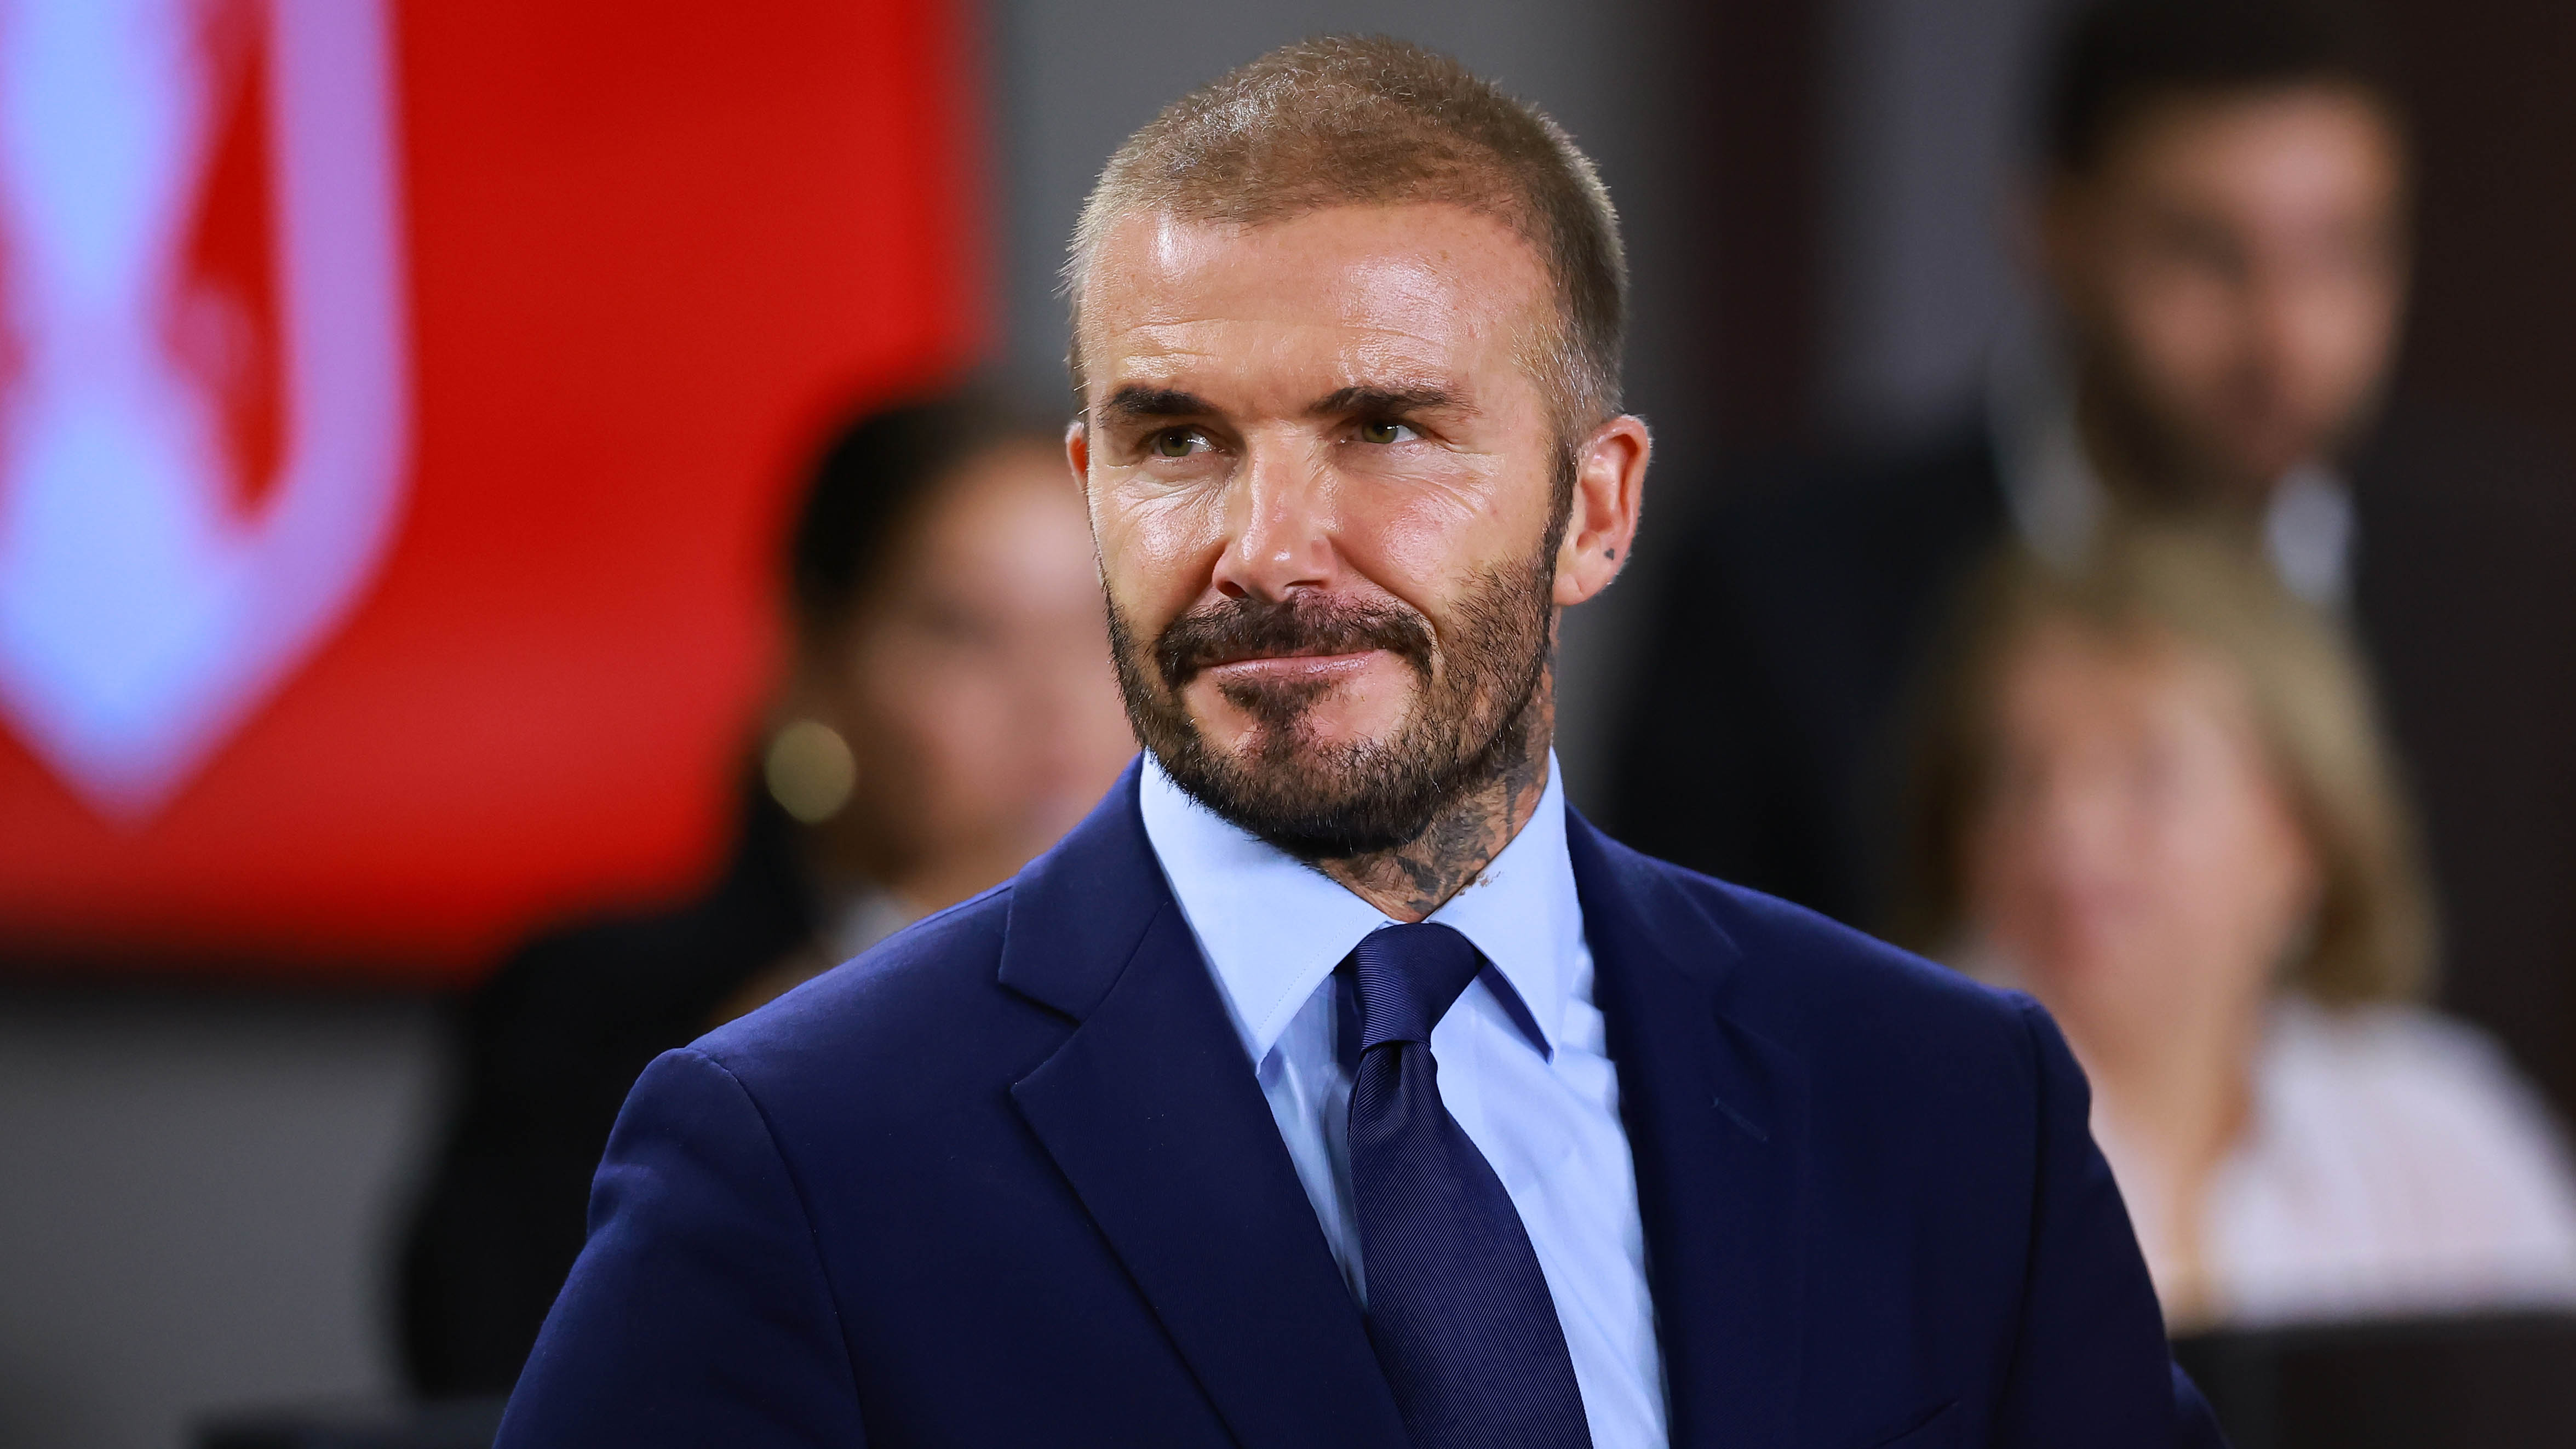 David Beckham reflects on highs and lows in 'Beckham' doc – NBC Connecticut